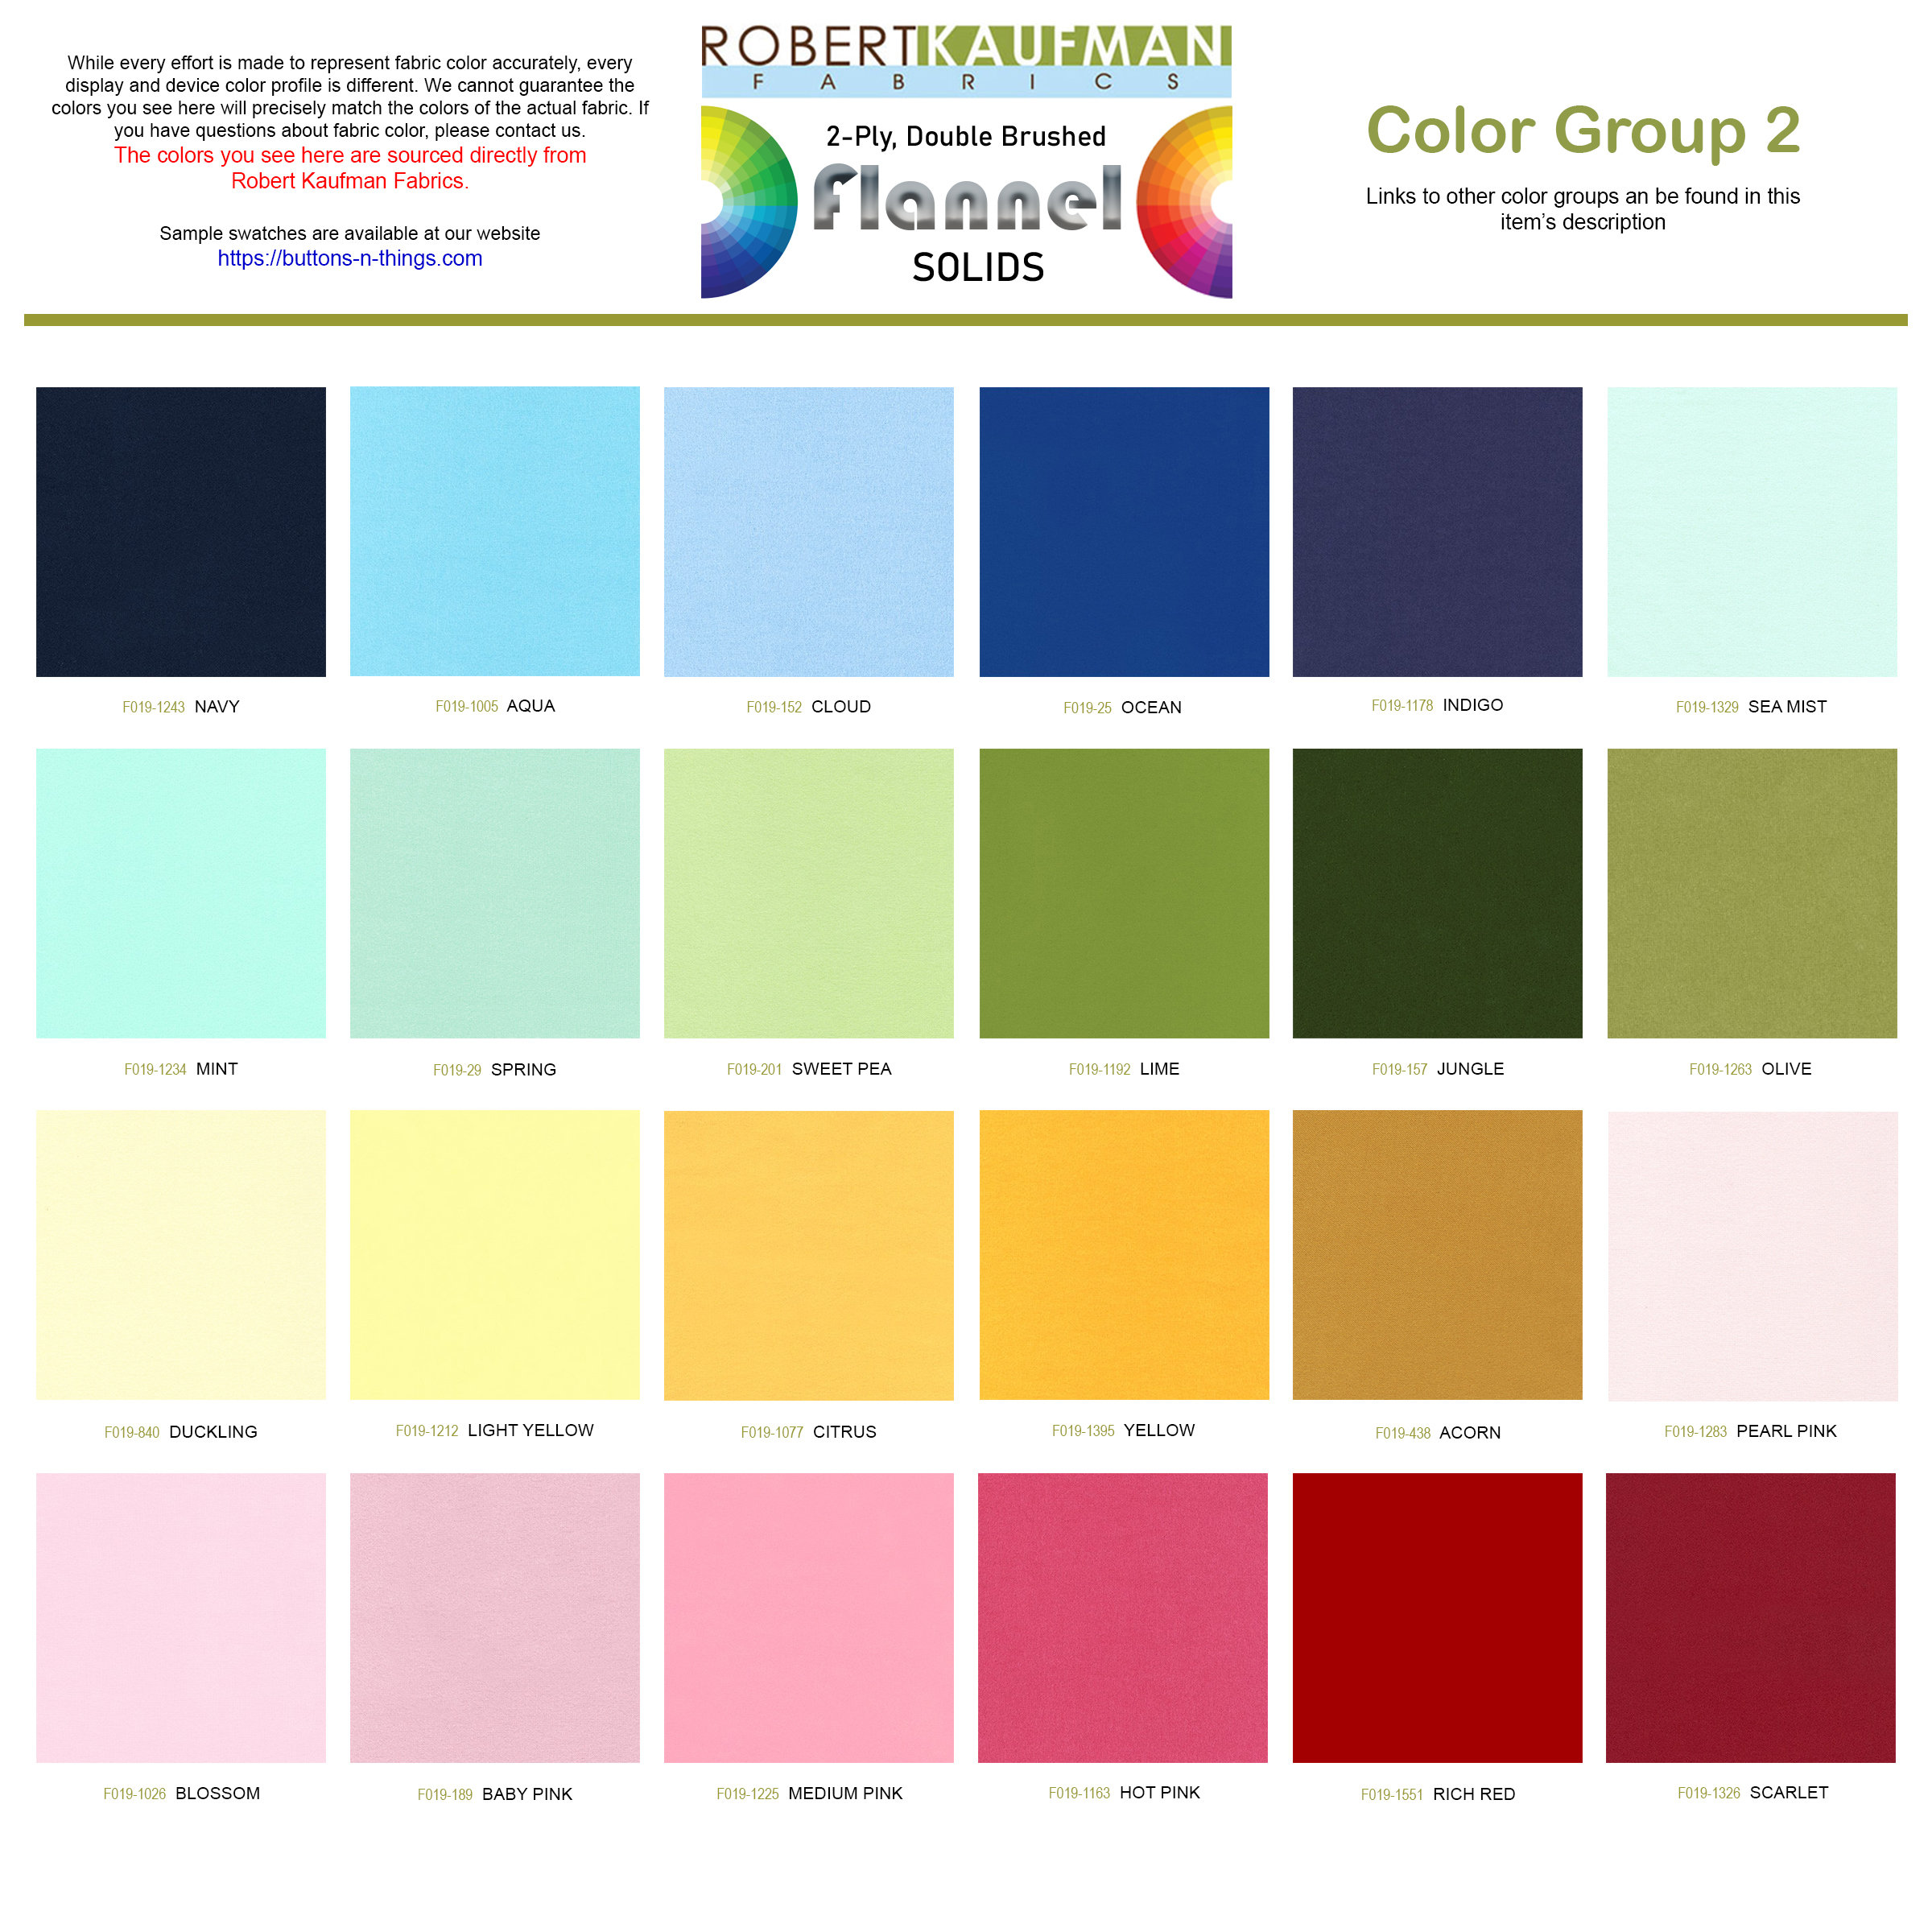 Robert Kaufman FLANNEL Solids 2-Ply Double Brushed - Color Group 2